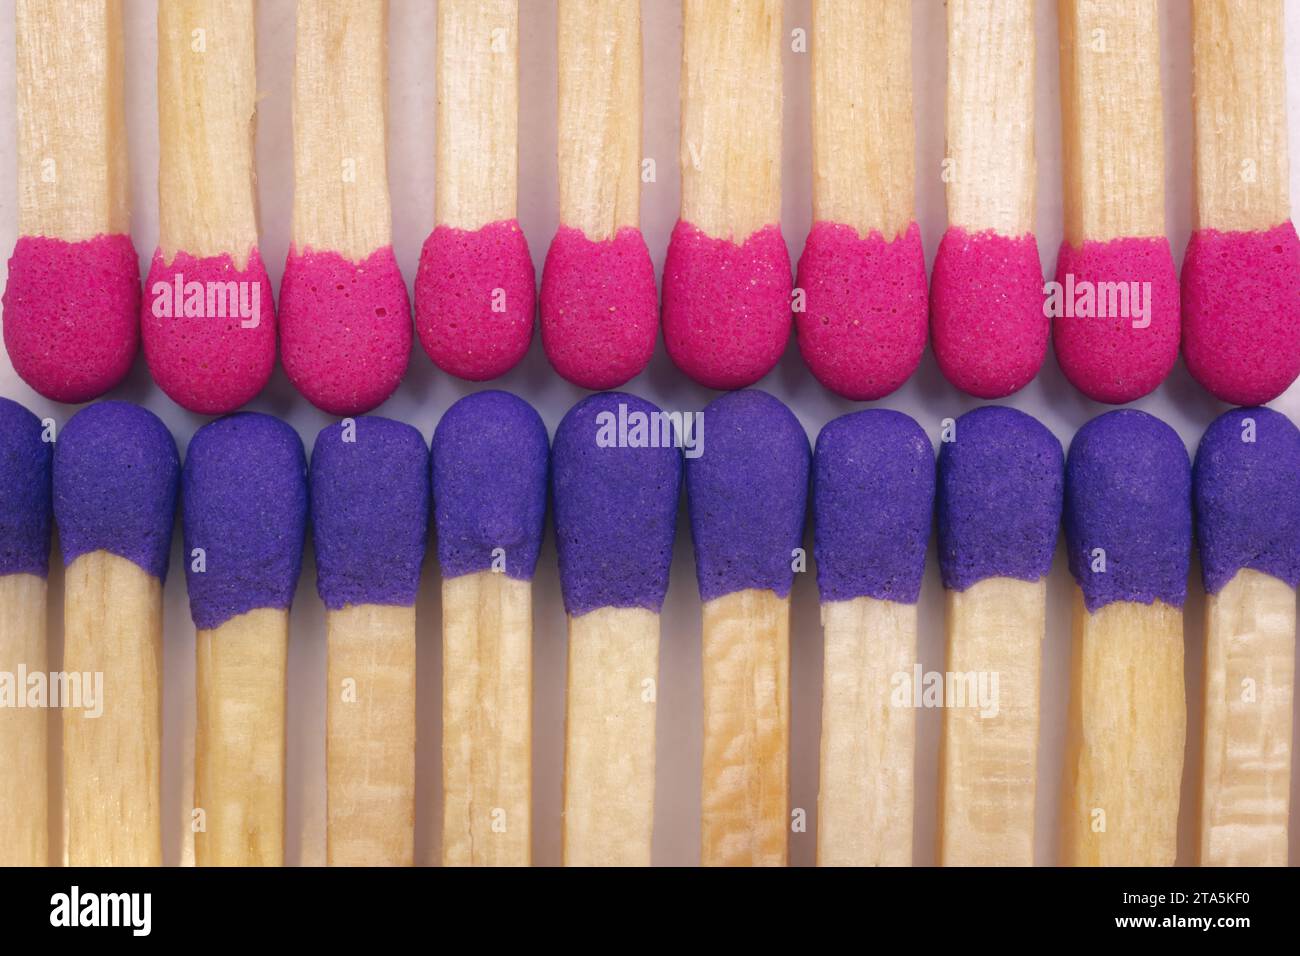 Pink And Blue Safety Matches. Concept Of The Confrontation And Flammable Conflict. Macro Photography. Stock Photo